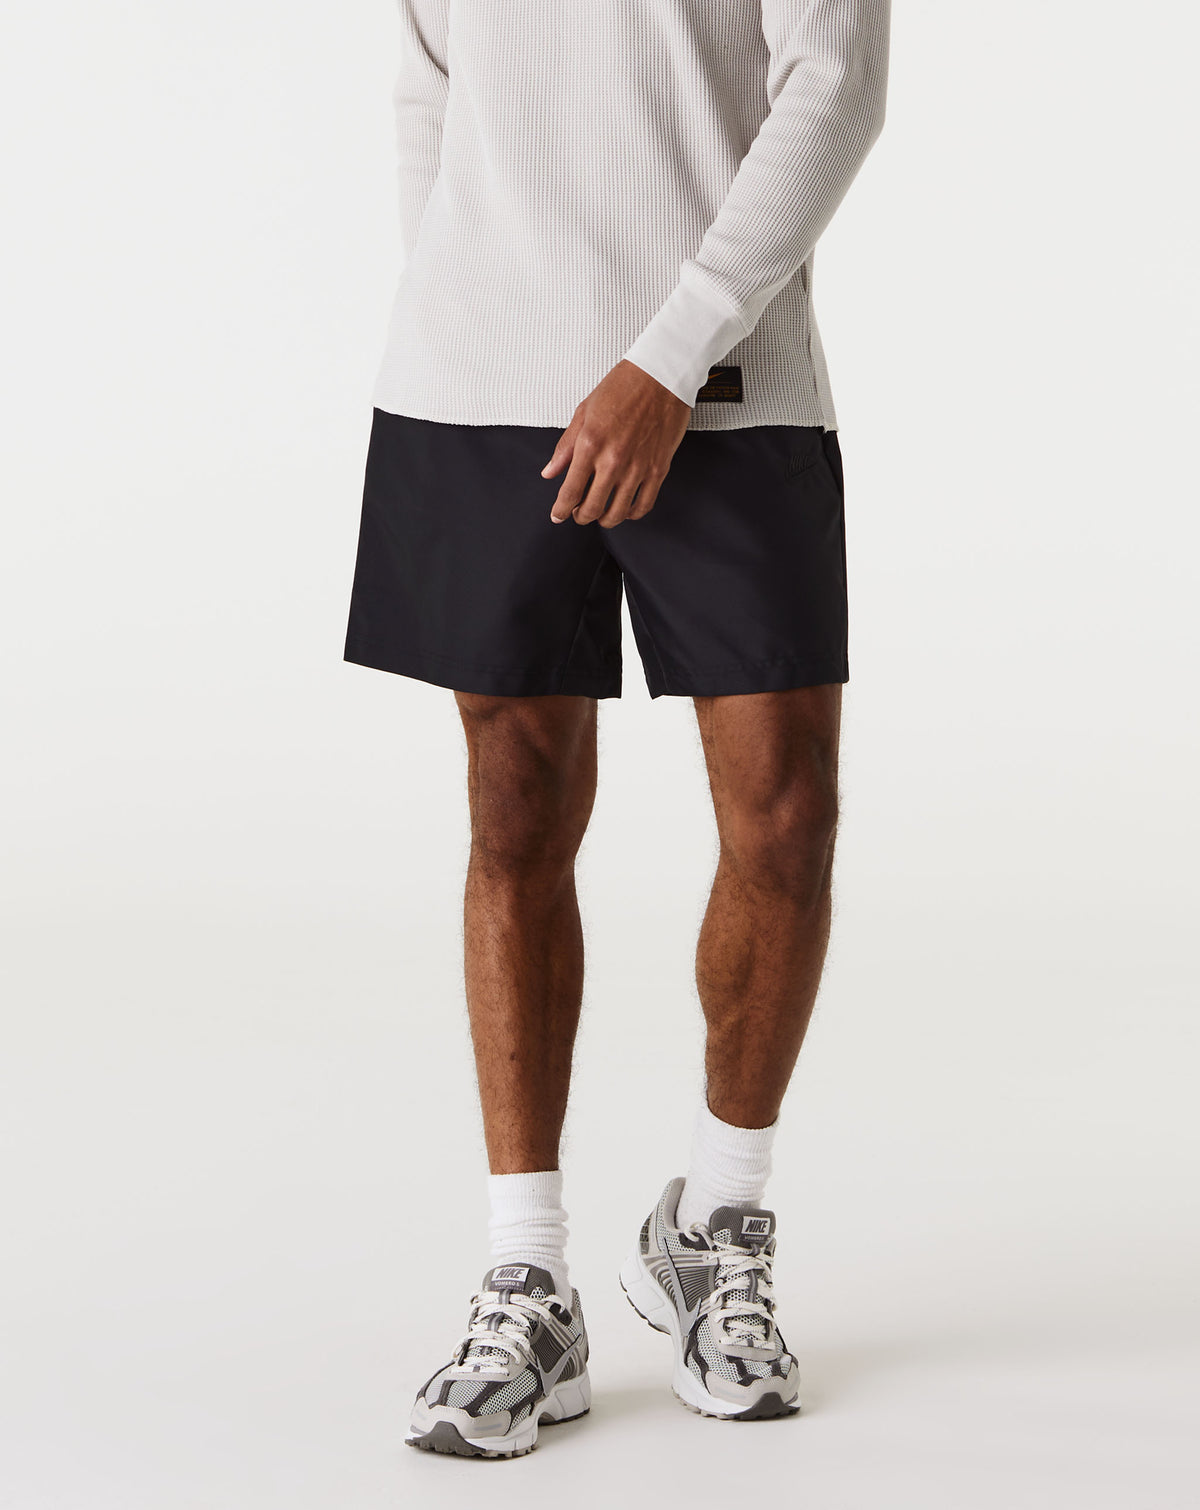 Nike Tech Essentials Utility Shorts - Rule of Next Apparel